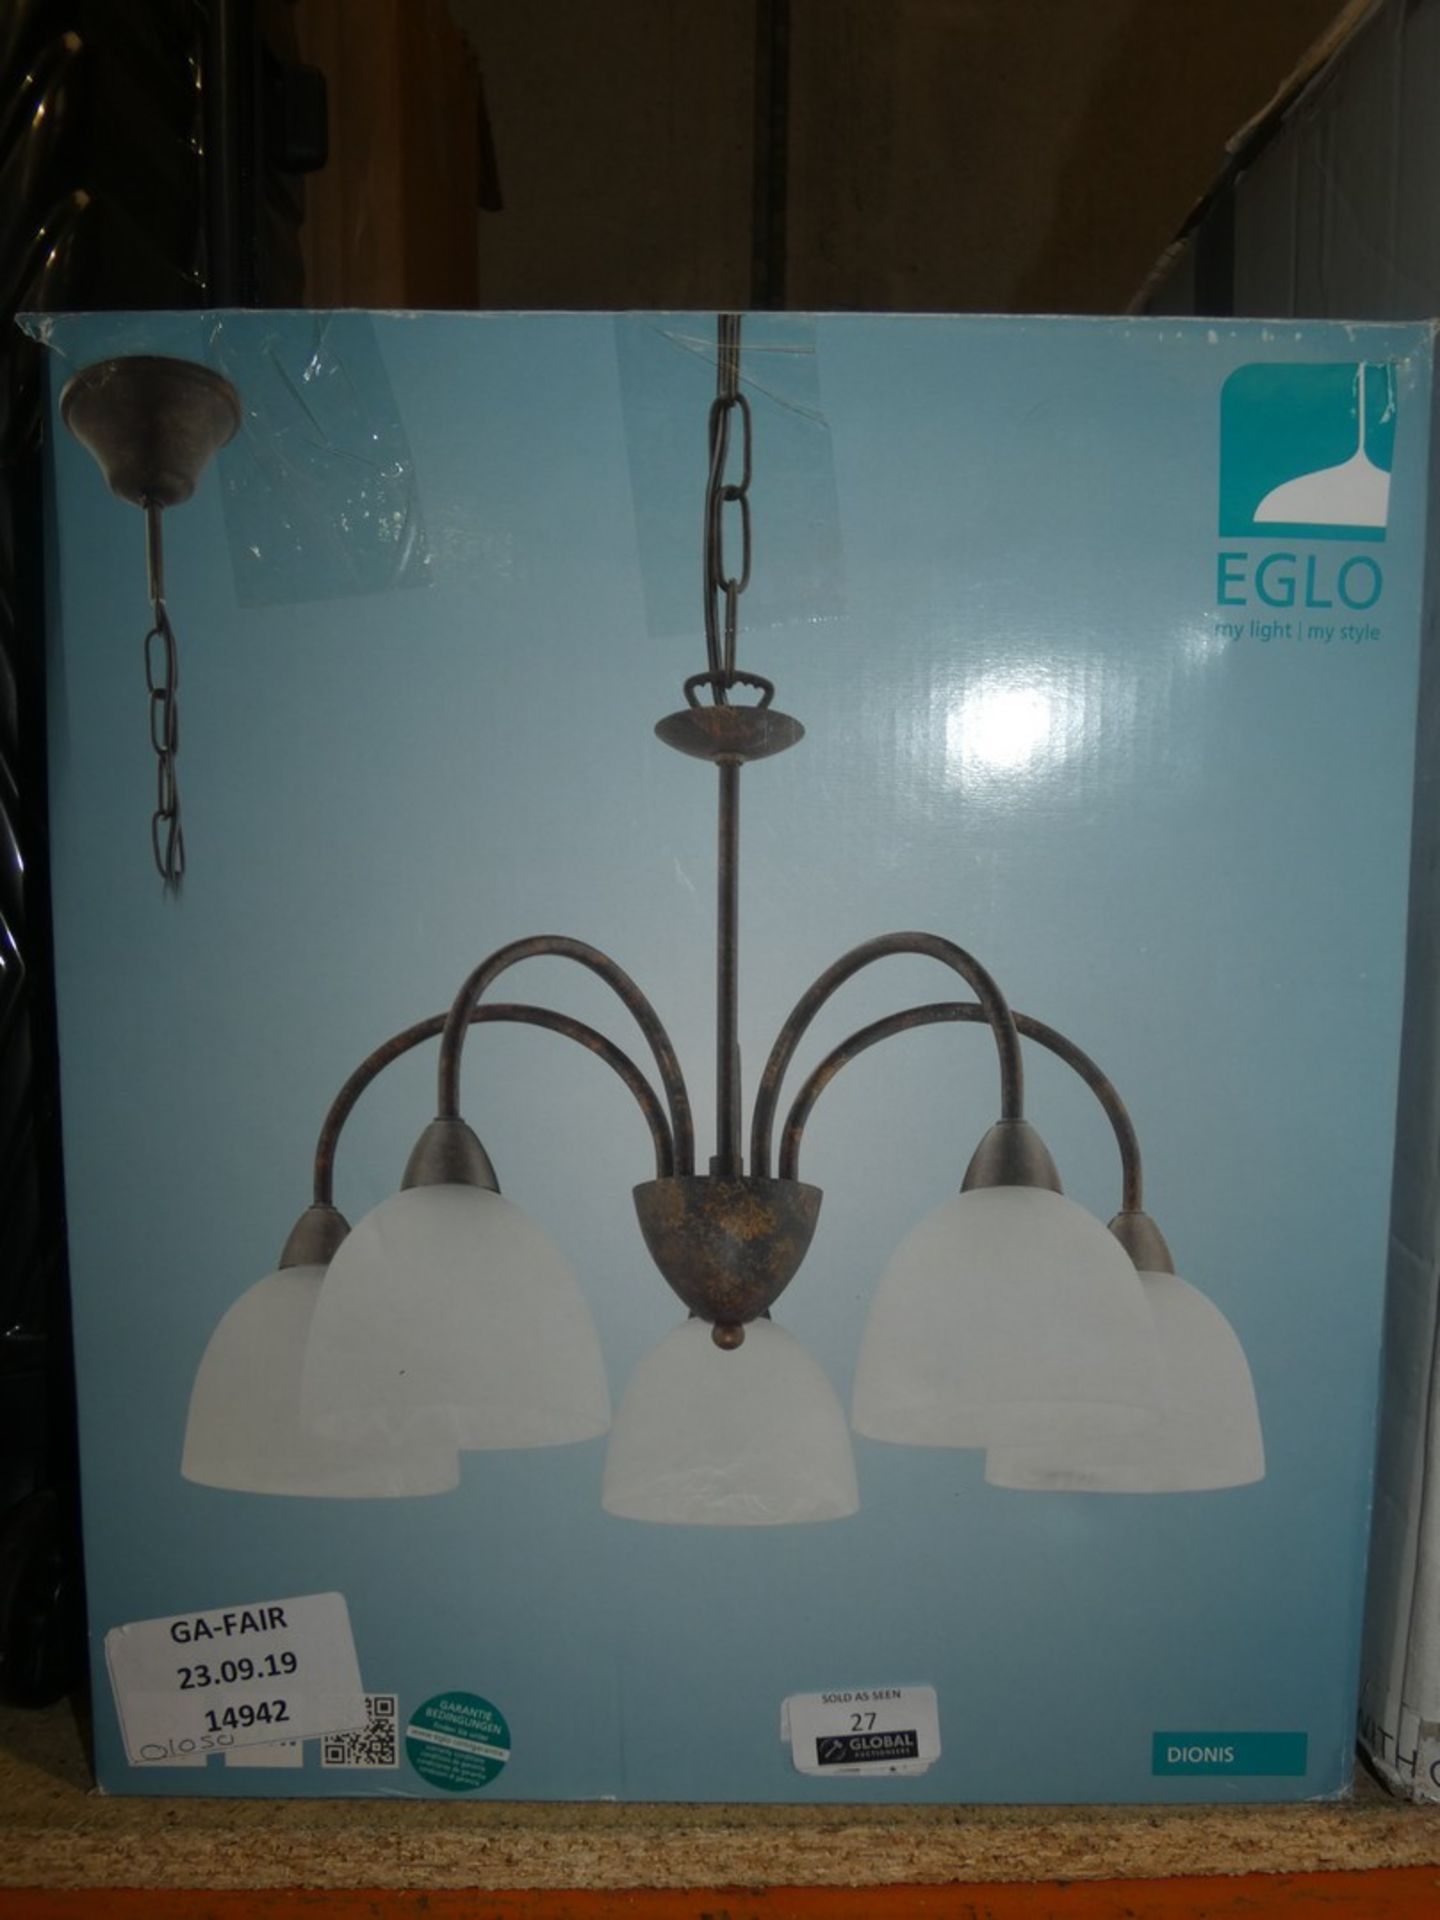 Boxed Eglo 5 Light Dionis Designer Ceiling Light RRP £105 (14942) (Public Viewing and Appraisals